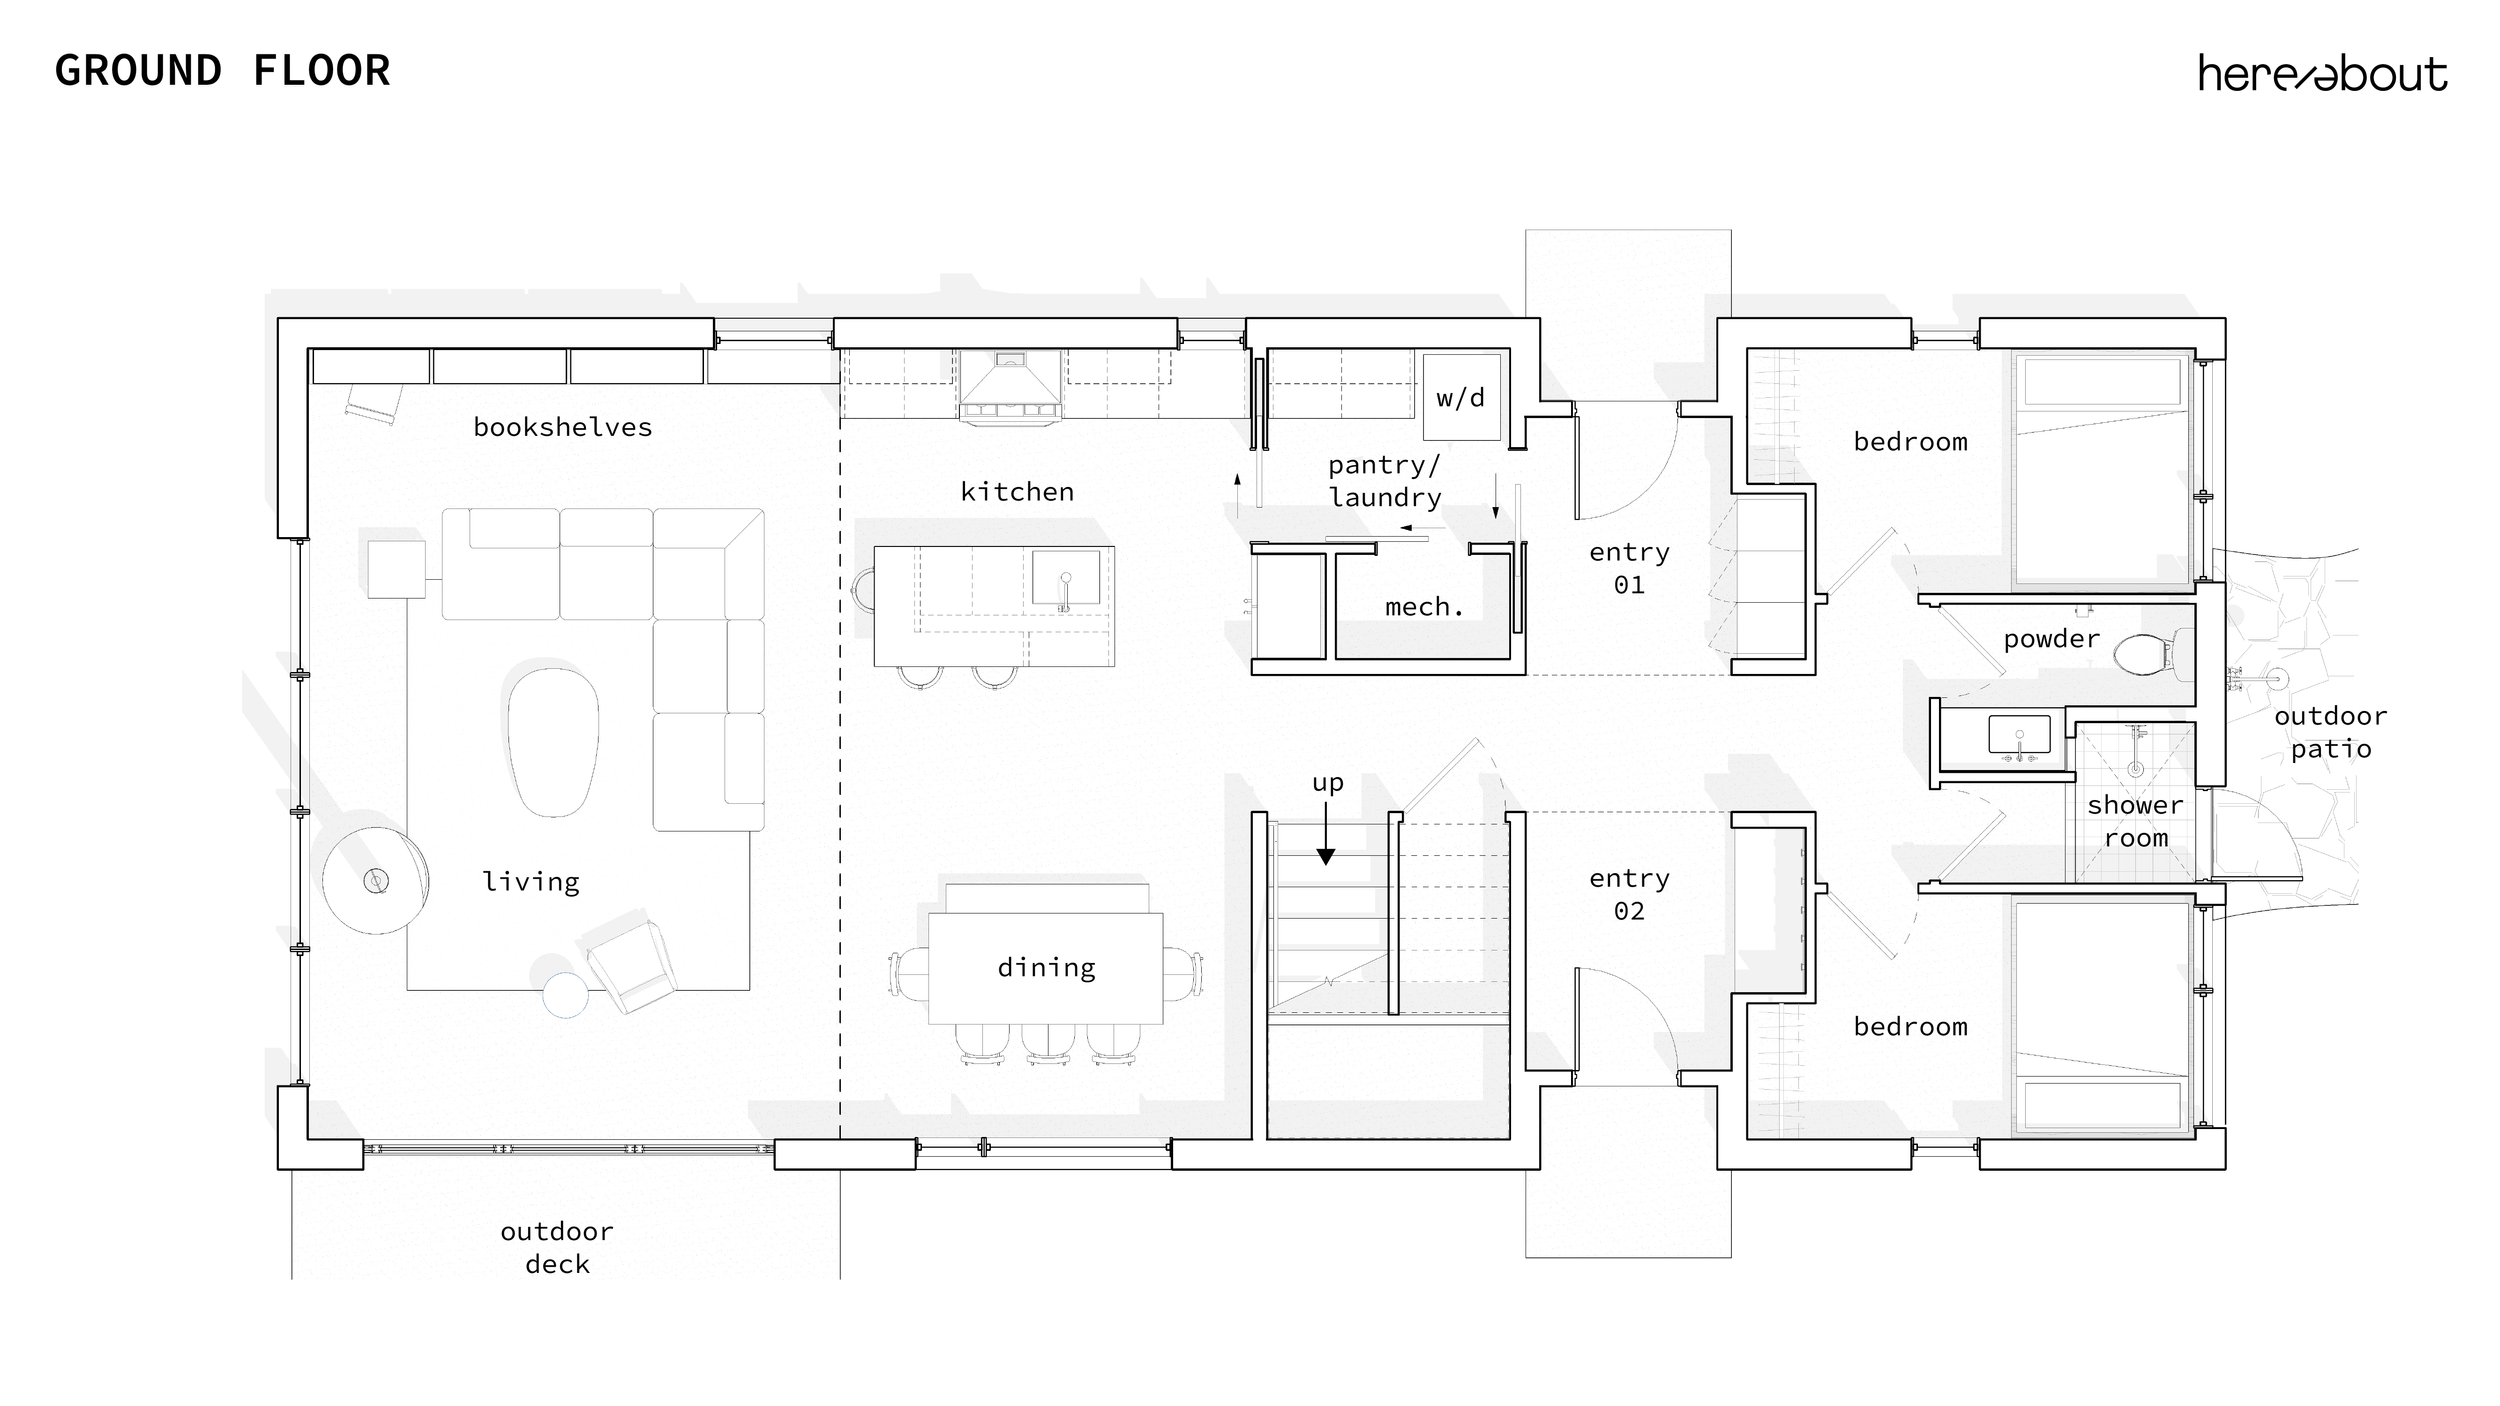 Hereabout - Floor Plan - The Hangout Ground Flr.png